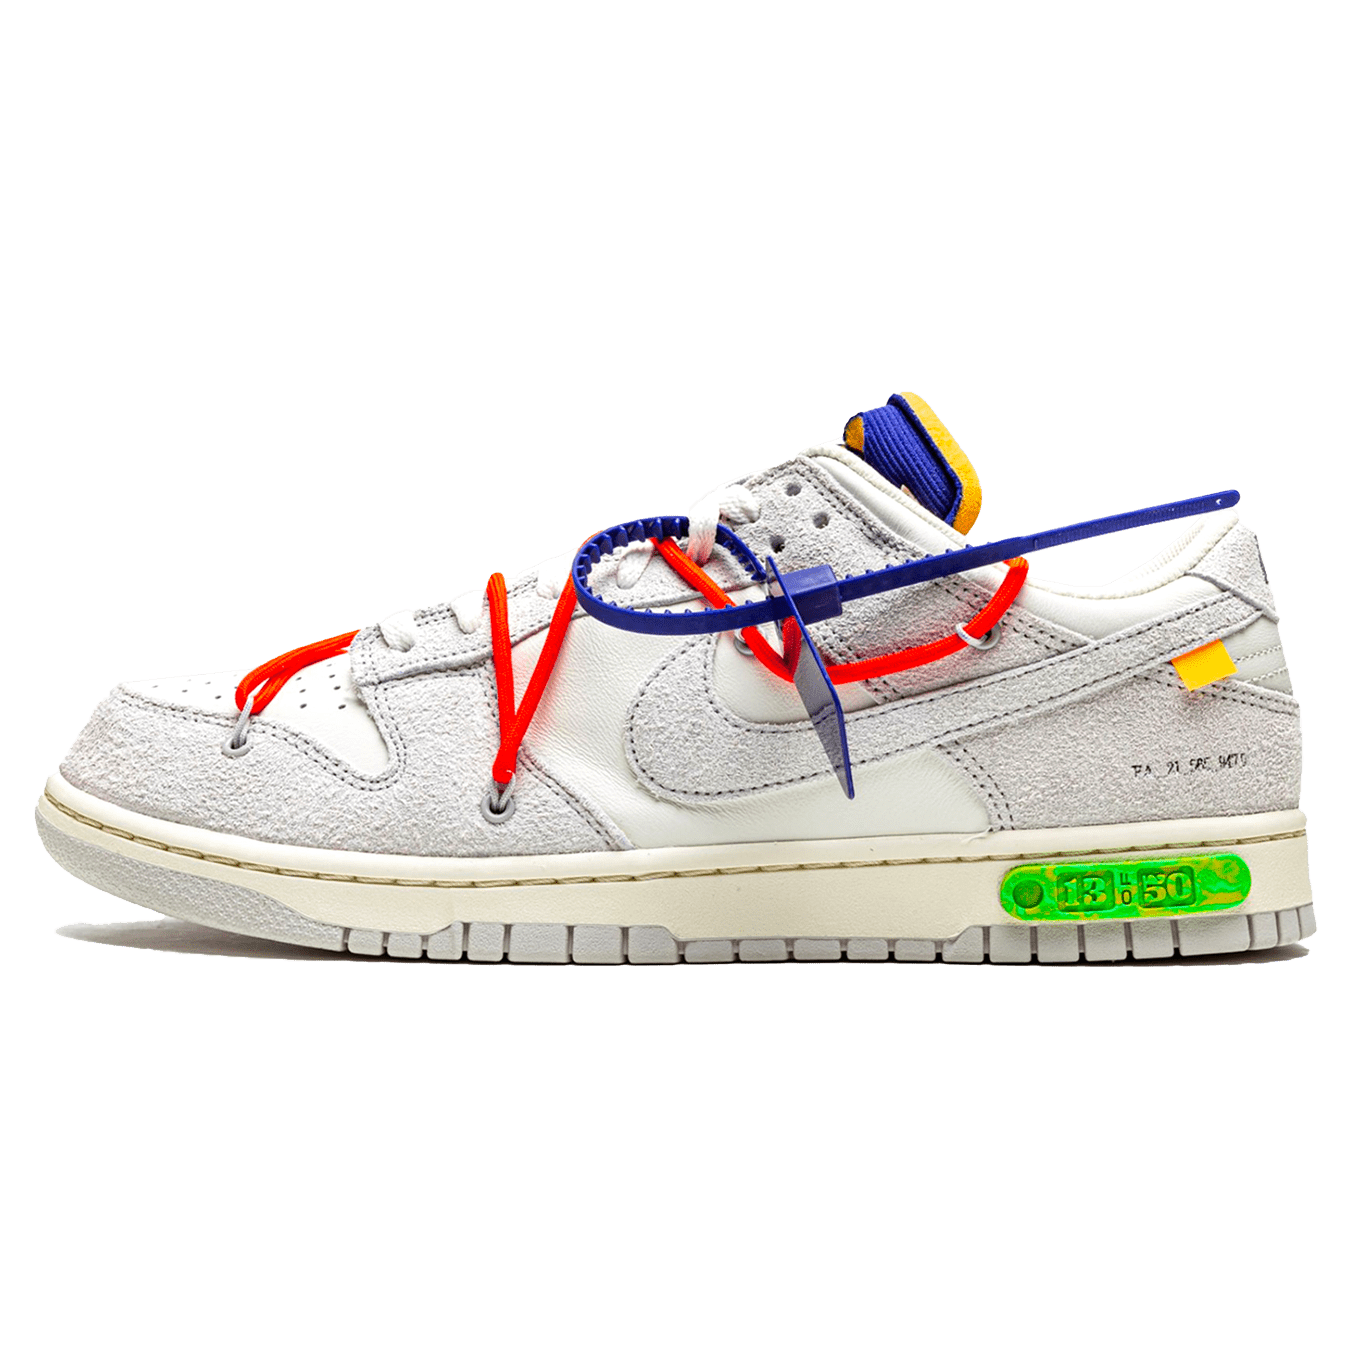 Off White x Nike Dunk Low Lot 13 of 50 DJ0950 110